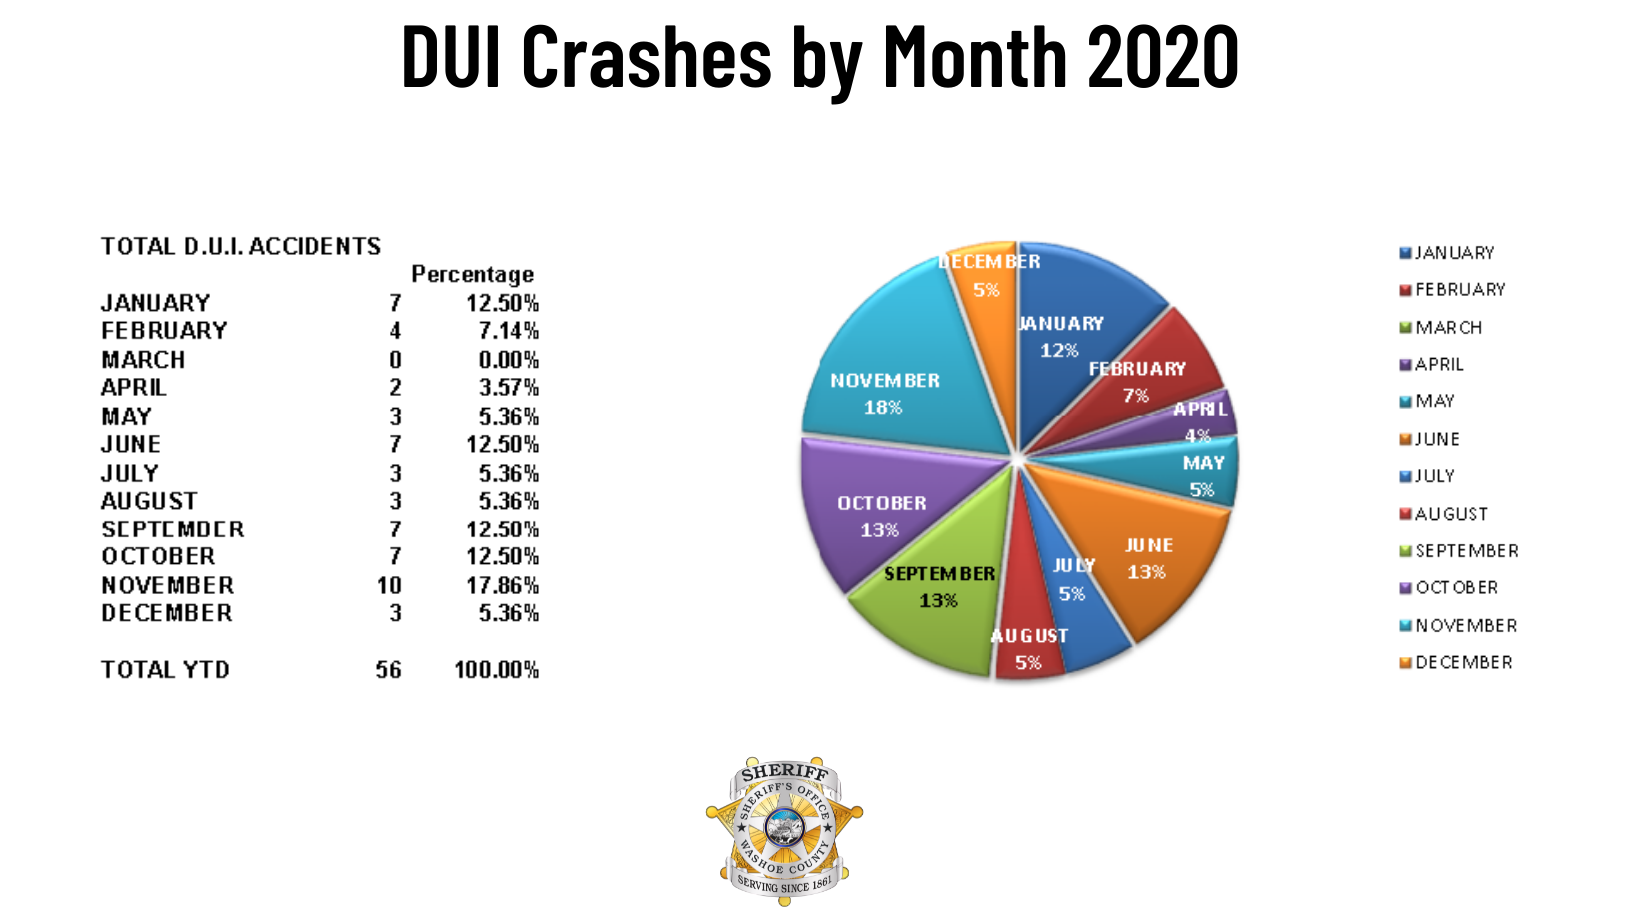 DUI-Crashes-by-Month-2020-CANVA.png